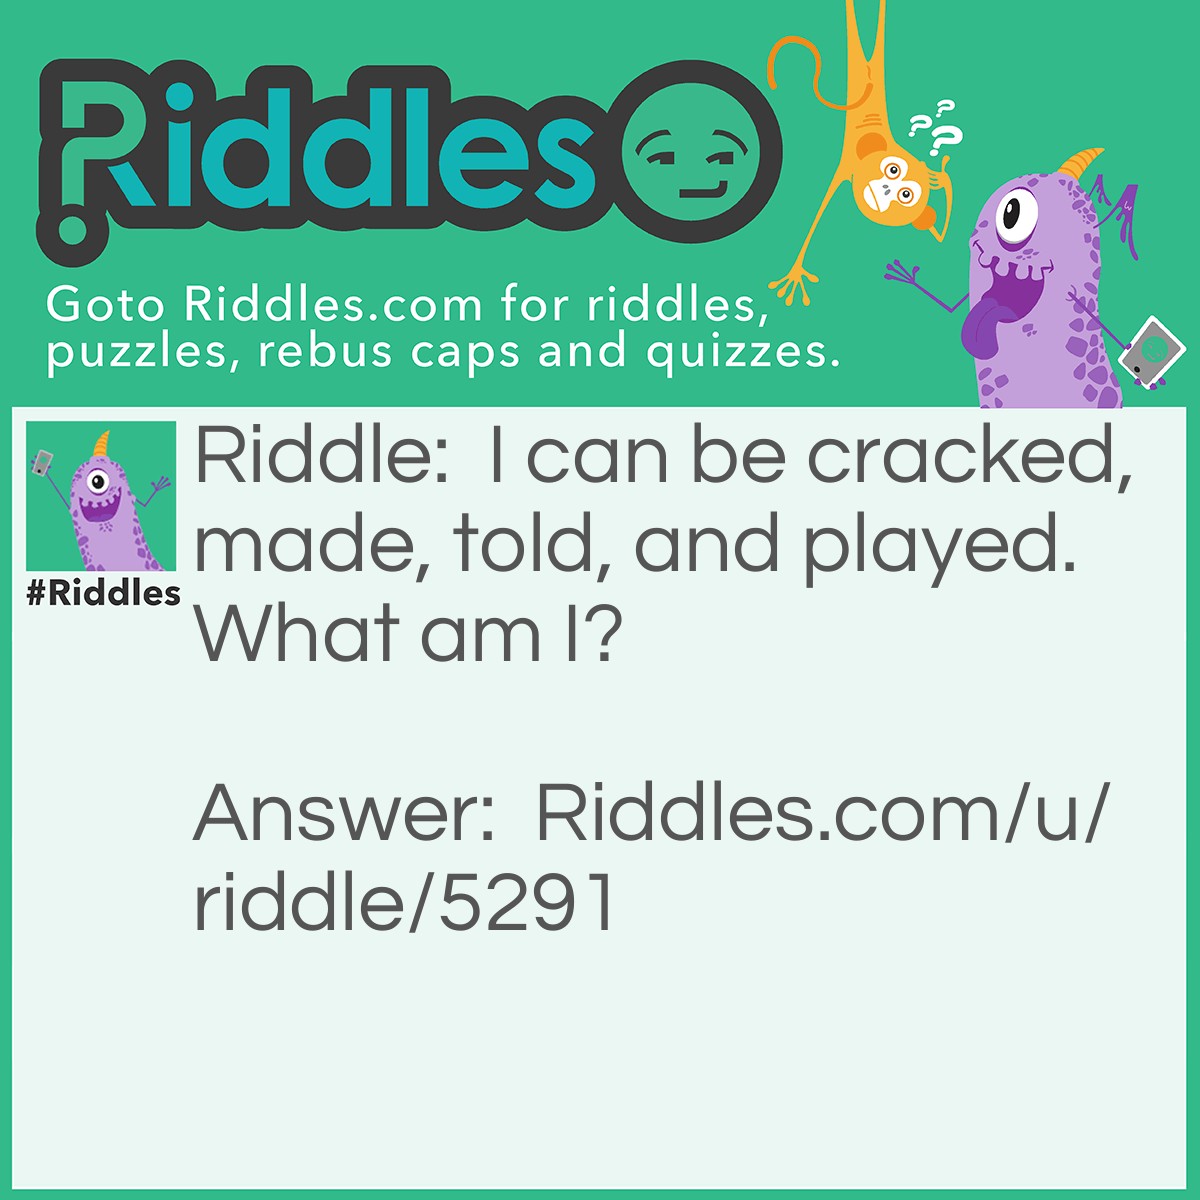 Riddle: I can be cracked, made, told, and played. What am I? Answer: I'm a Joke.